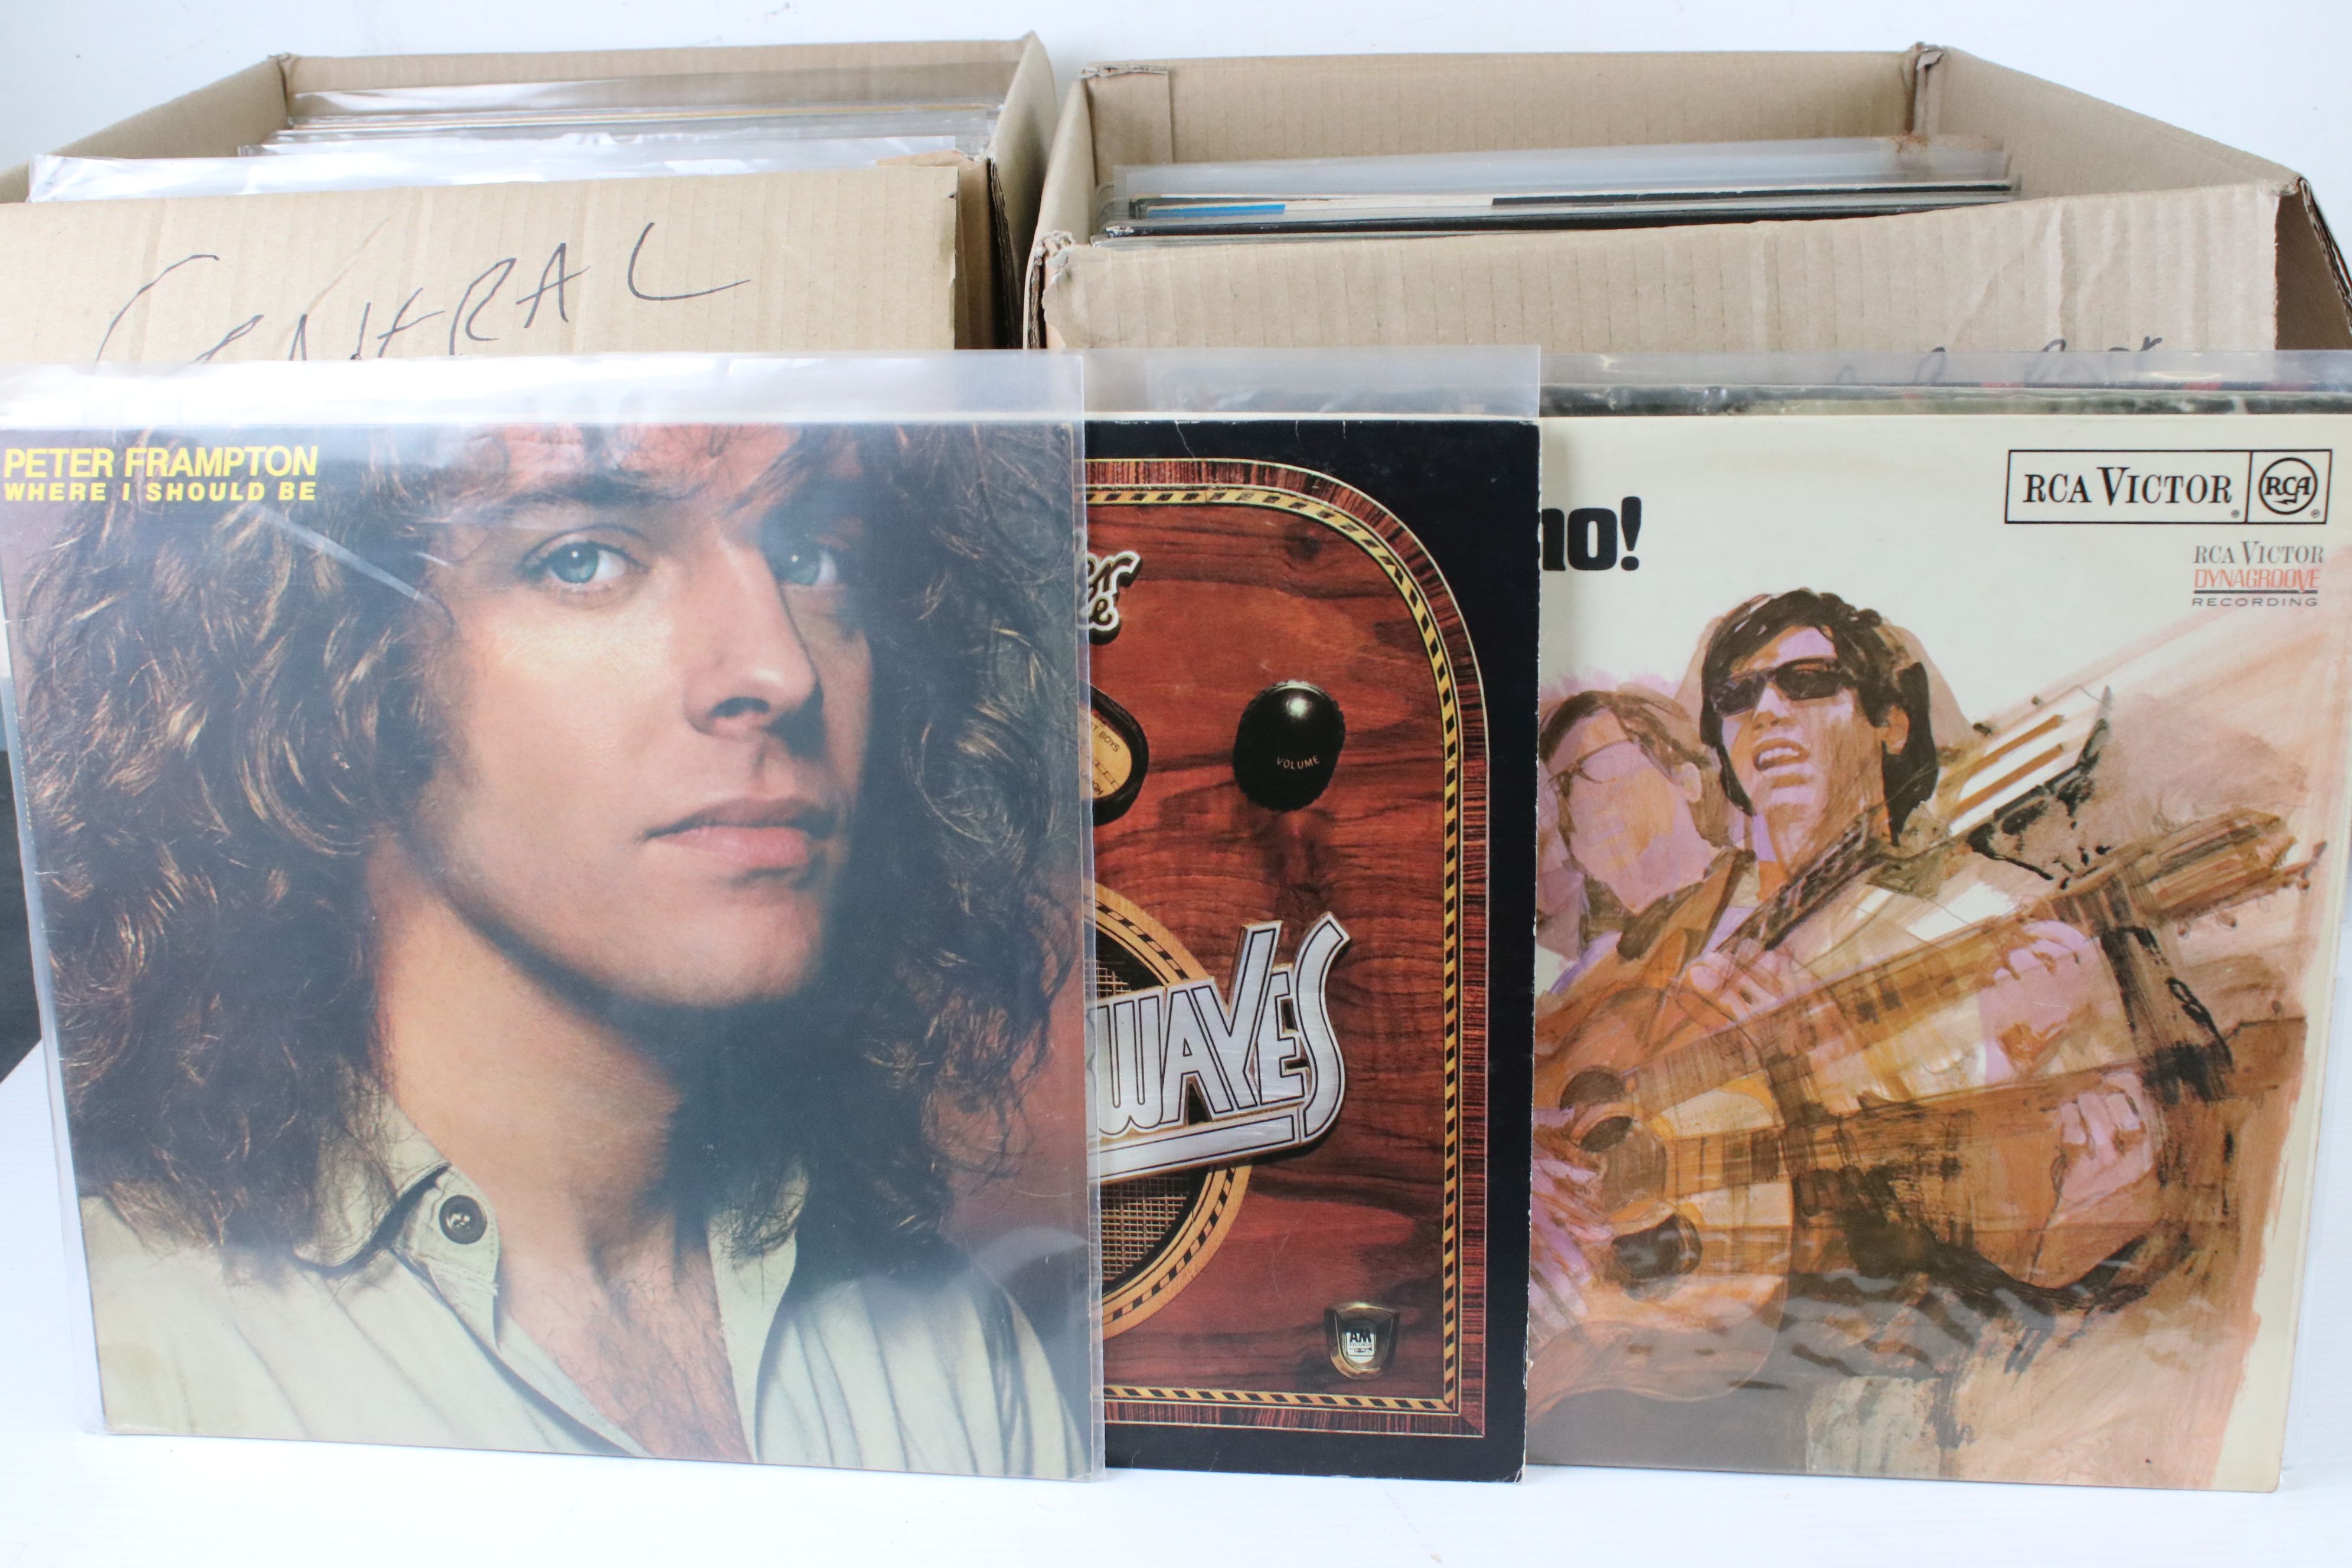 Vinyl - Collection of over 100 rock & pop LP's including Paul Simon, America, Allman Brothers, - Image 7 of 7